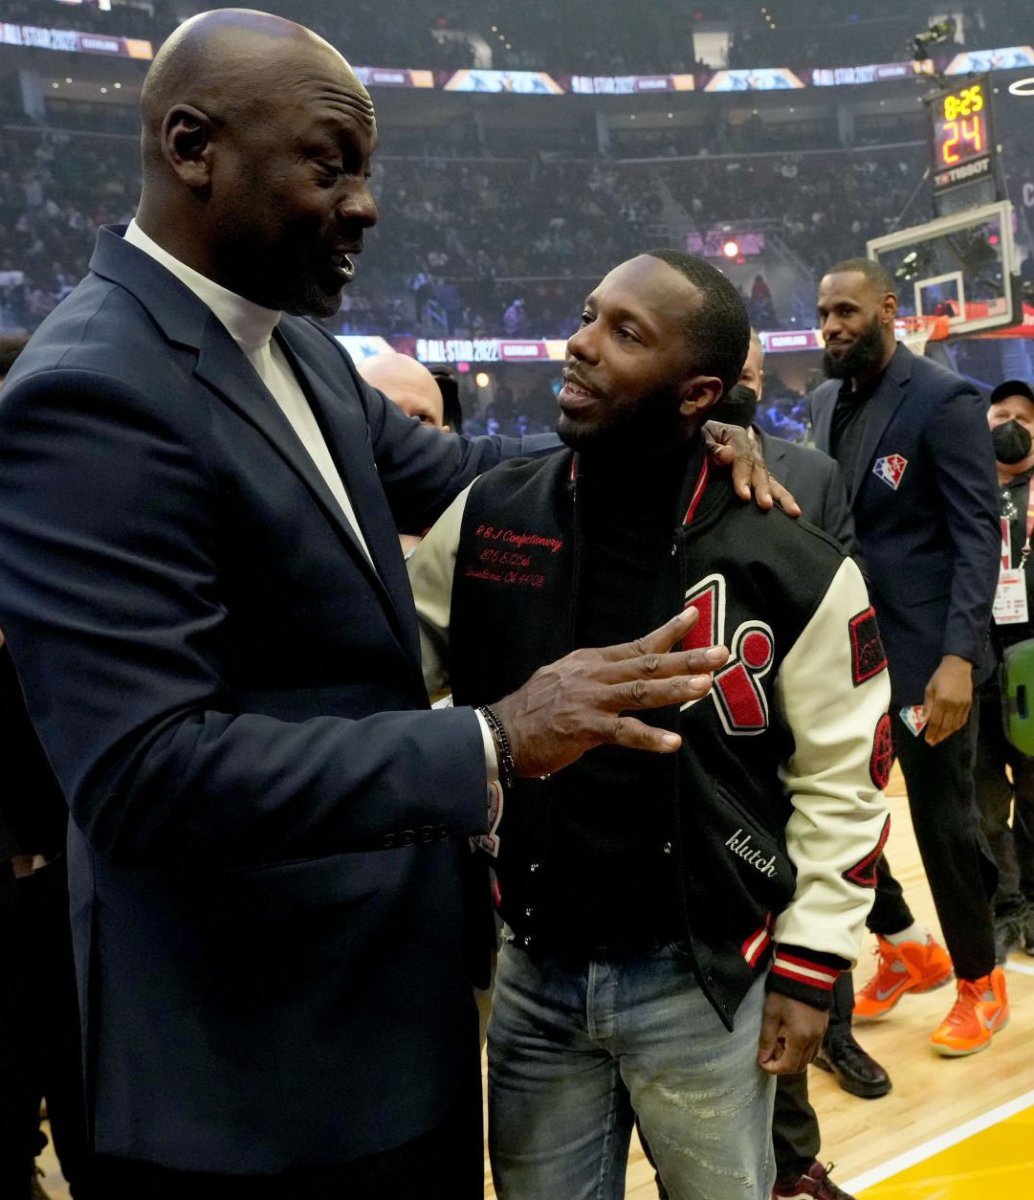 Michael Jordan Talking With Rich Paul While LeBron James Jealously Looks At Them